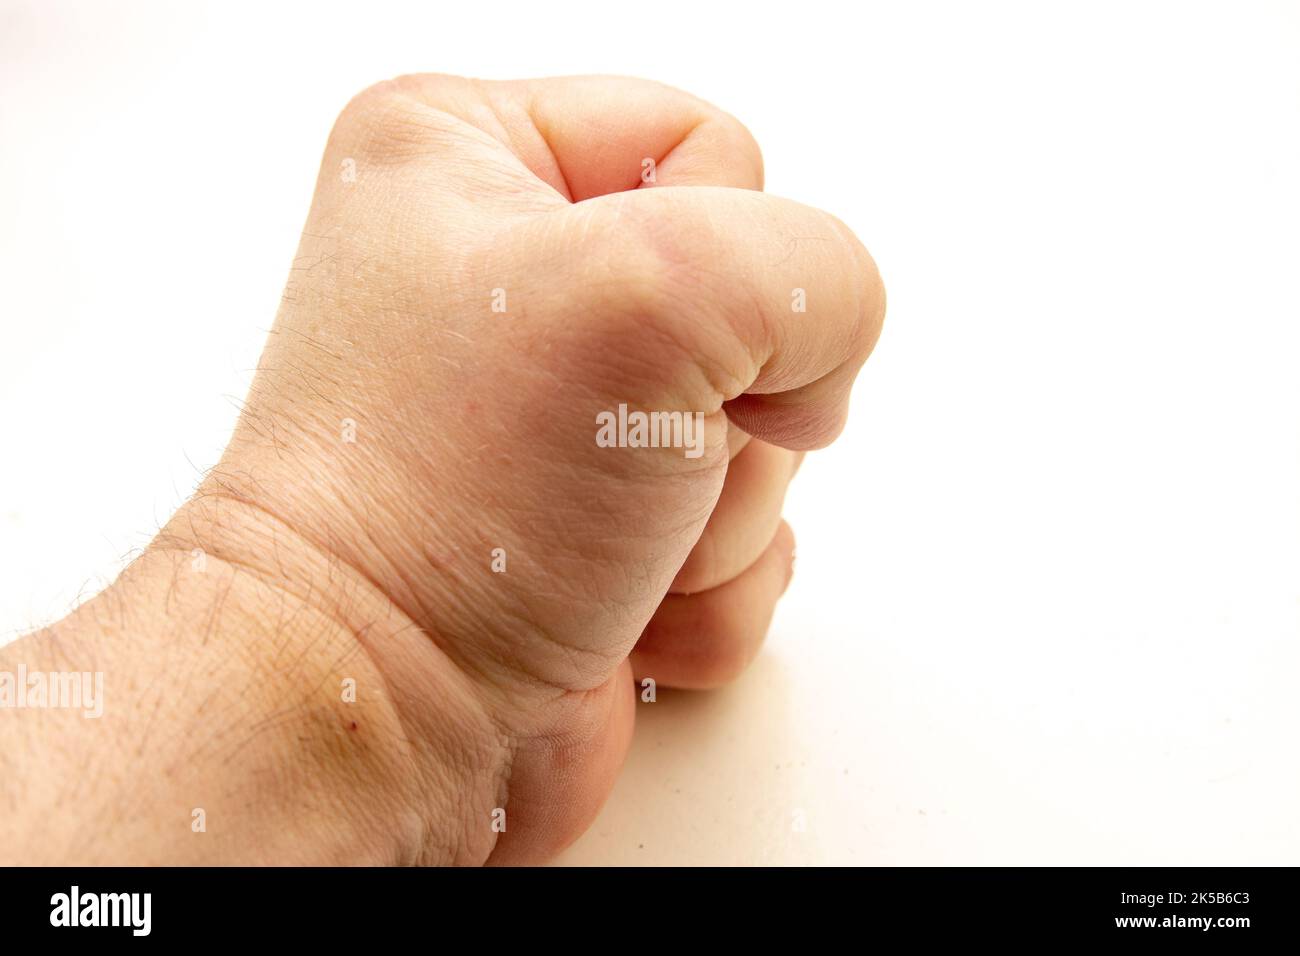 A fist of a person banging on a table Stock Photo